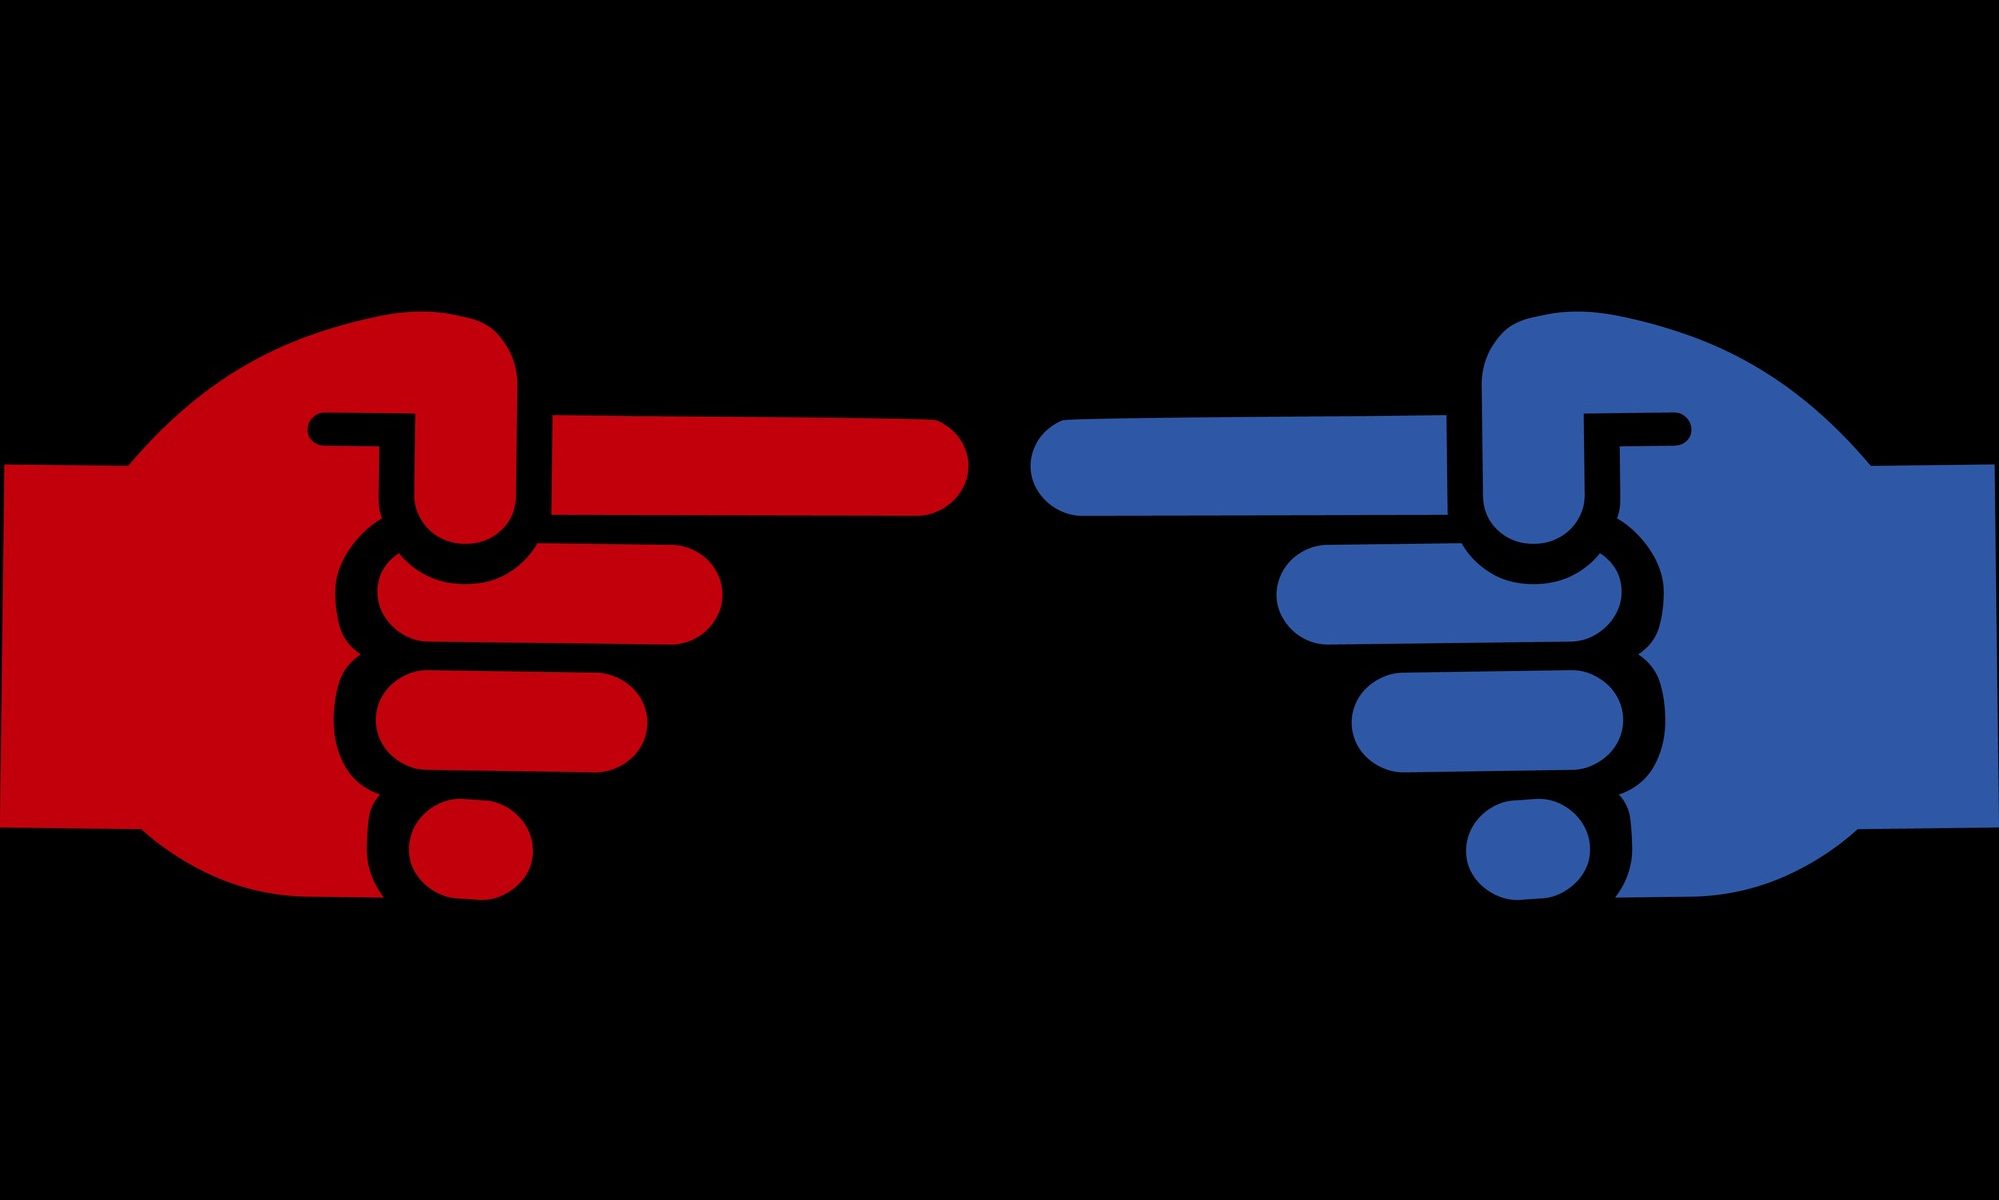 image of blue and red fingers pointing at each other